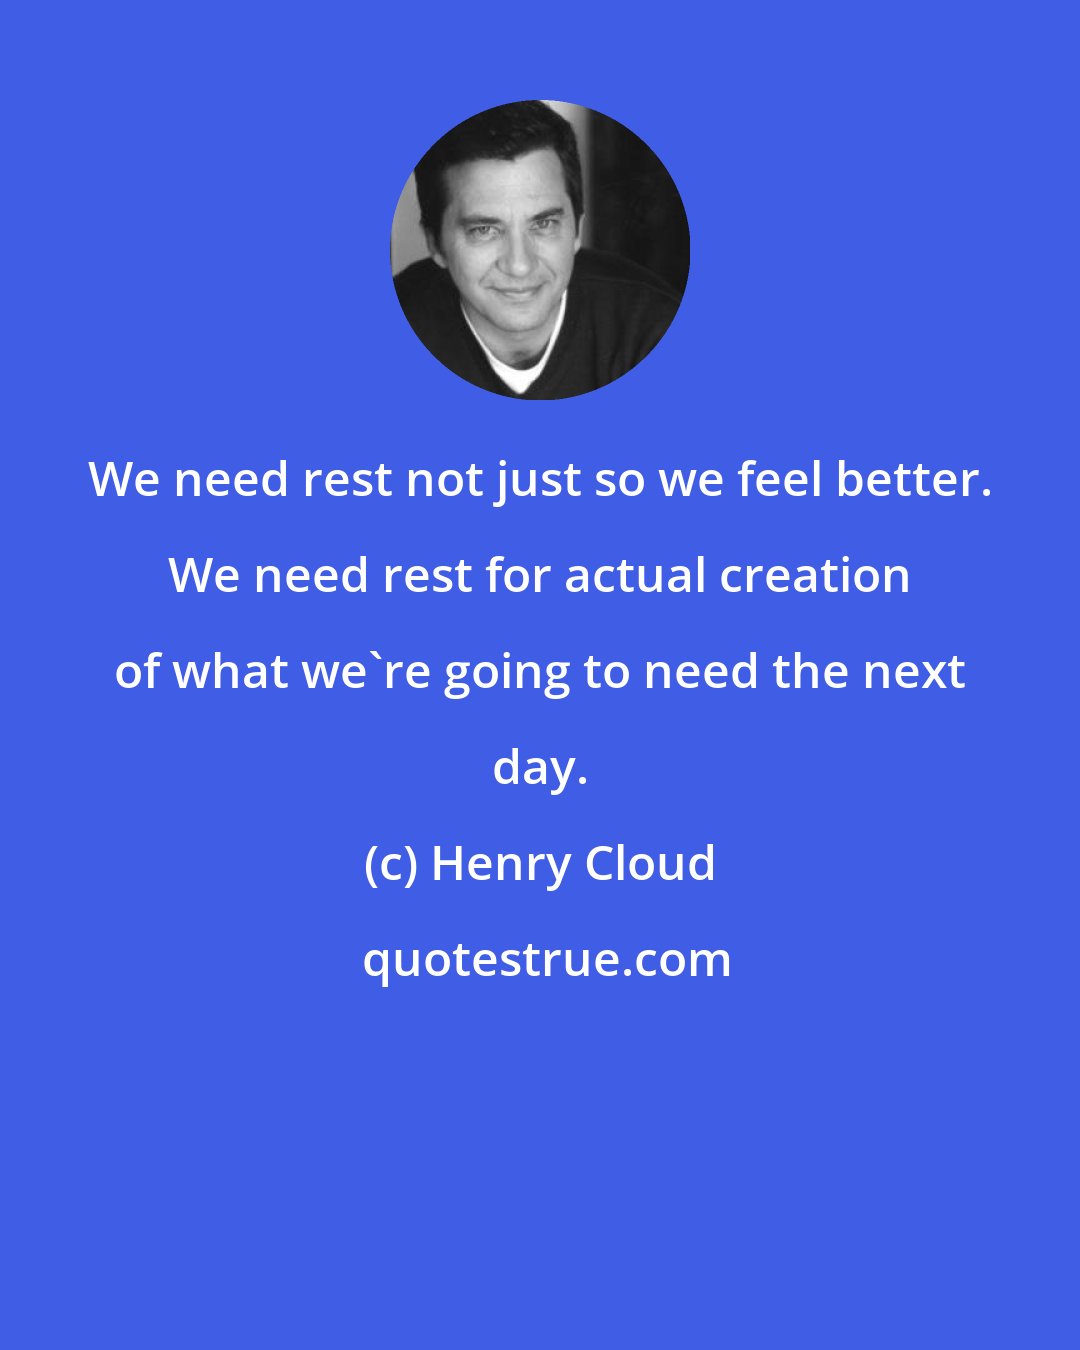 Henry Cloud: We need rest not just so we feel better. We need rest for actual creation of what we're going to need the next day.